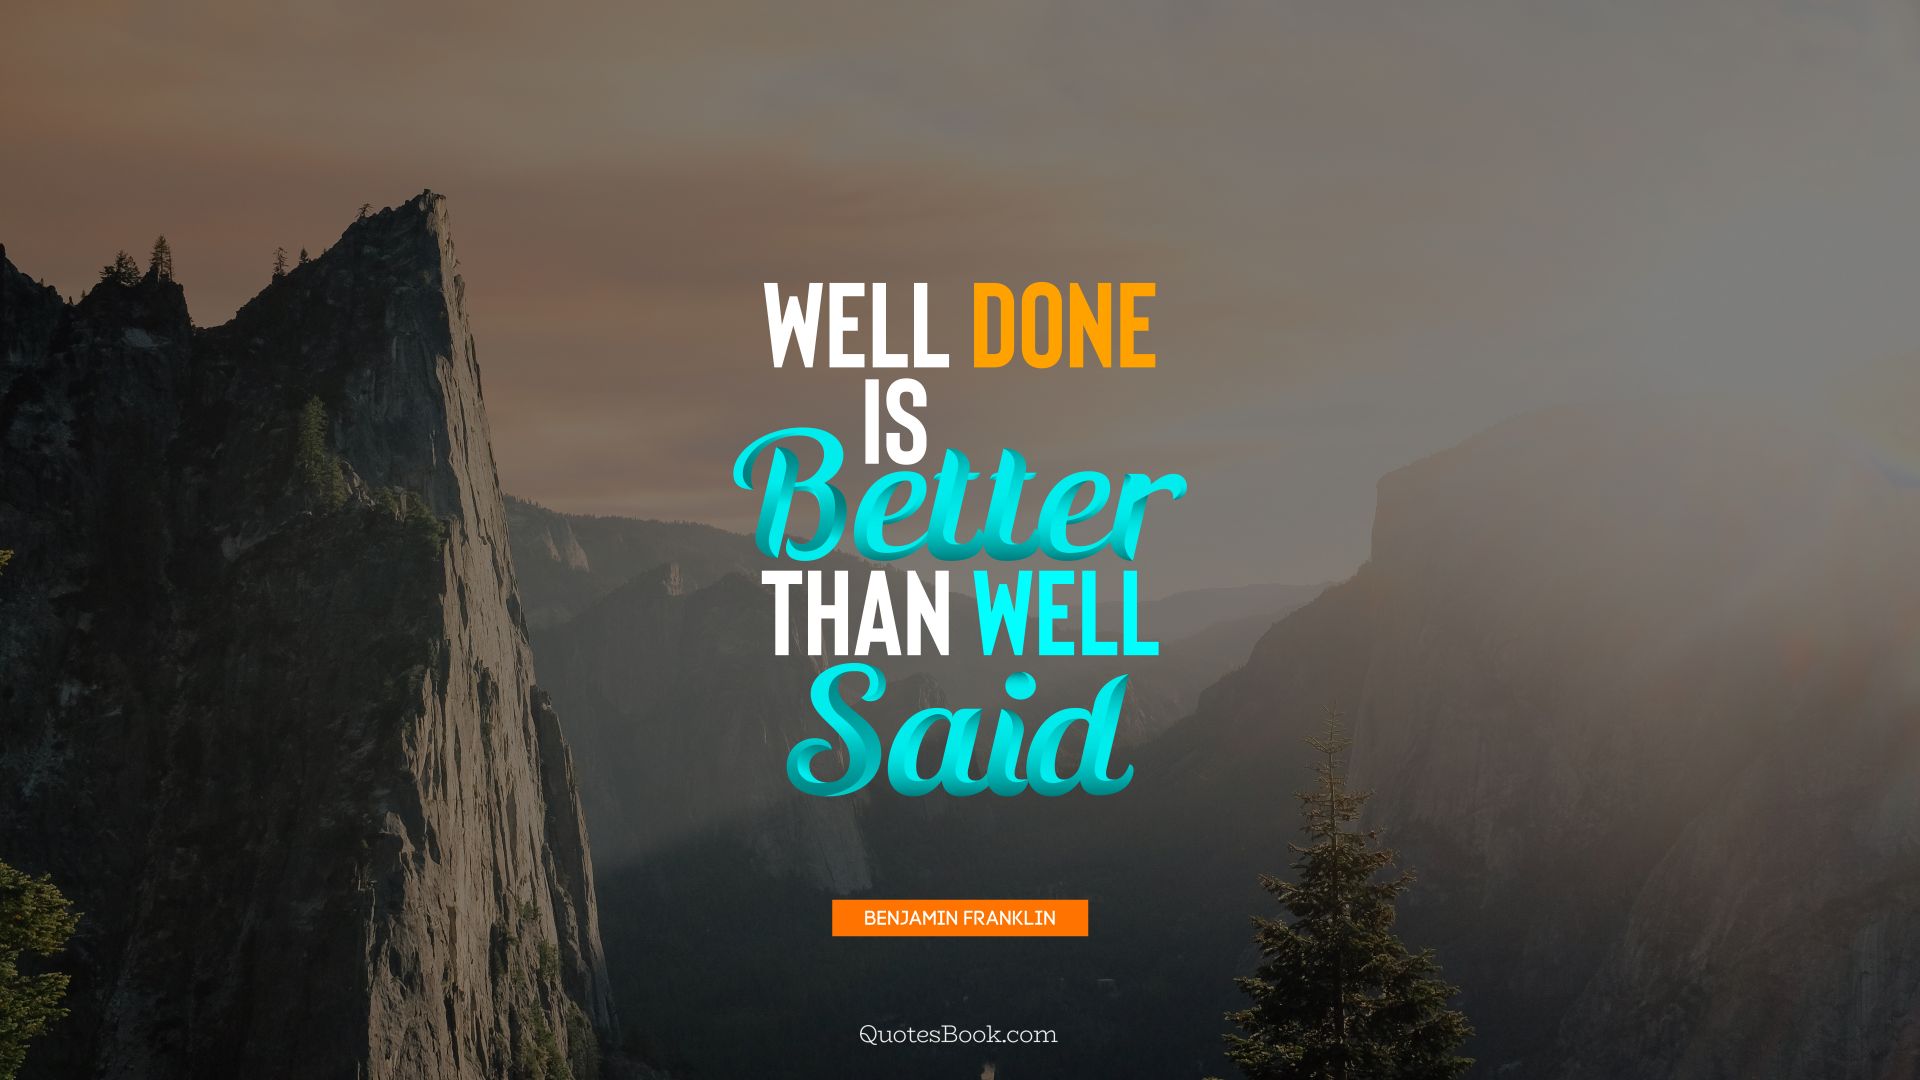 Well done is better than well said. - Quote by Benjamin Franklin